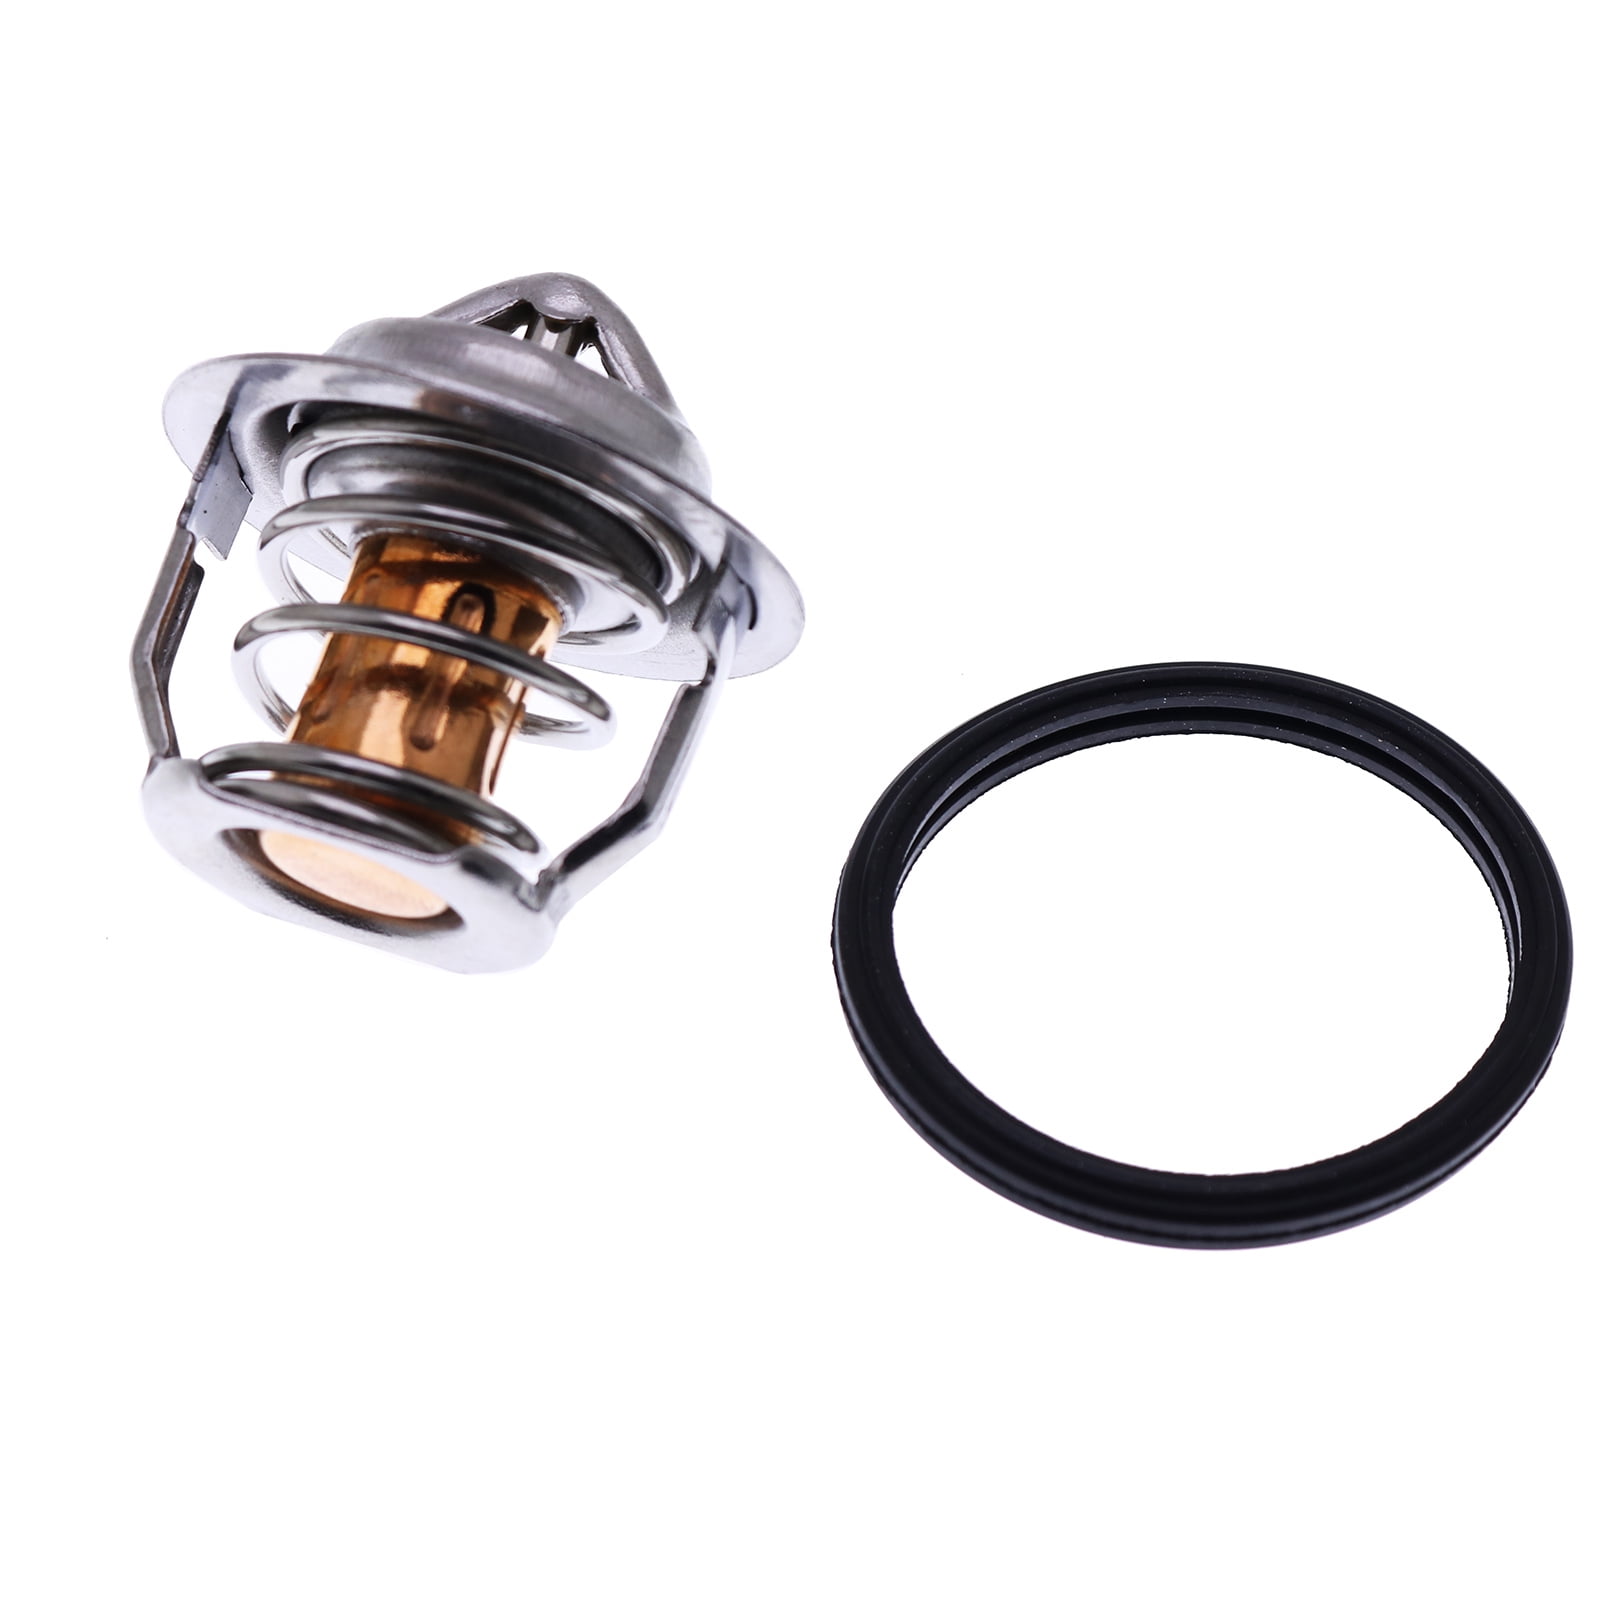 New Thermostat for Bobcat S100 S150 S160 S175 S185 S70 T190